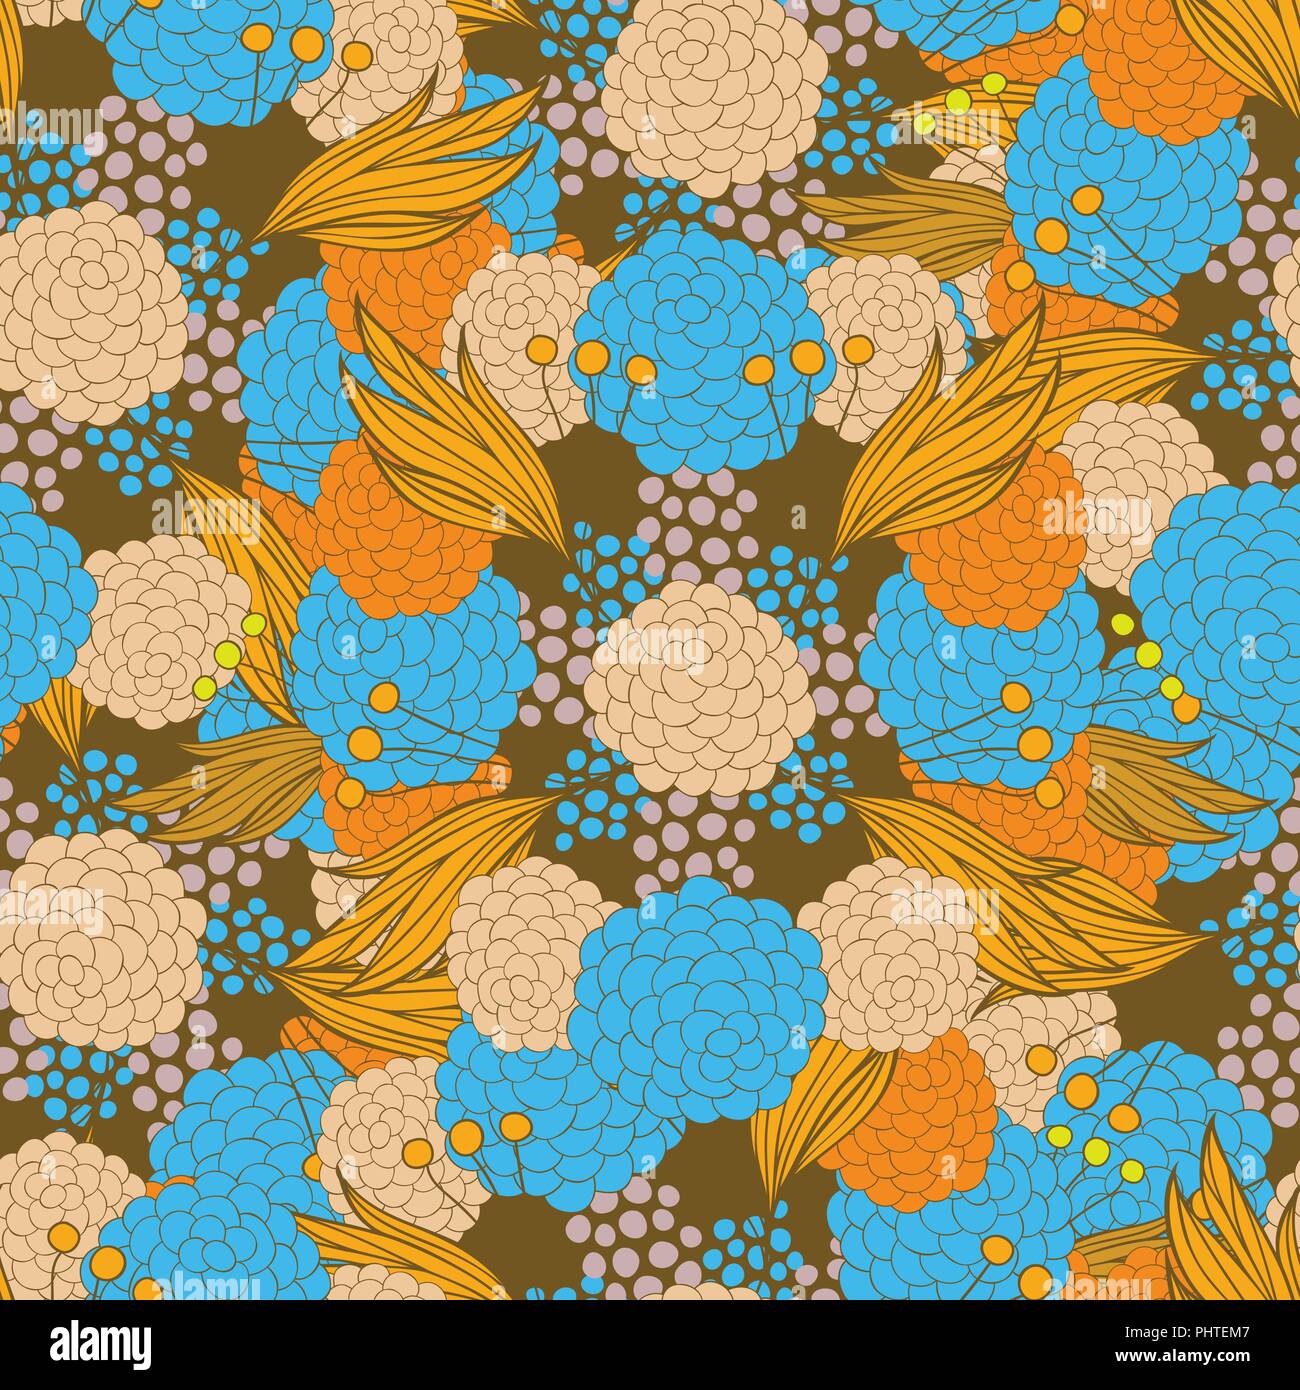 Colorful floral seamless background pattern Stock Vector